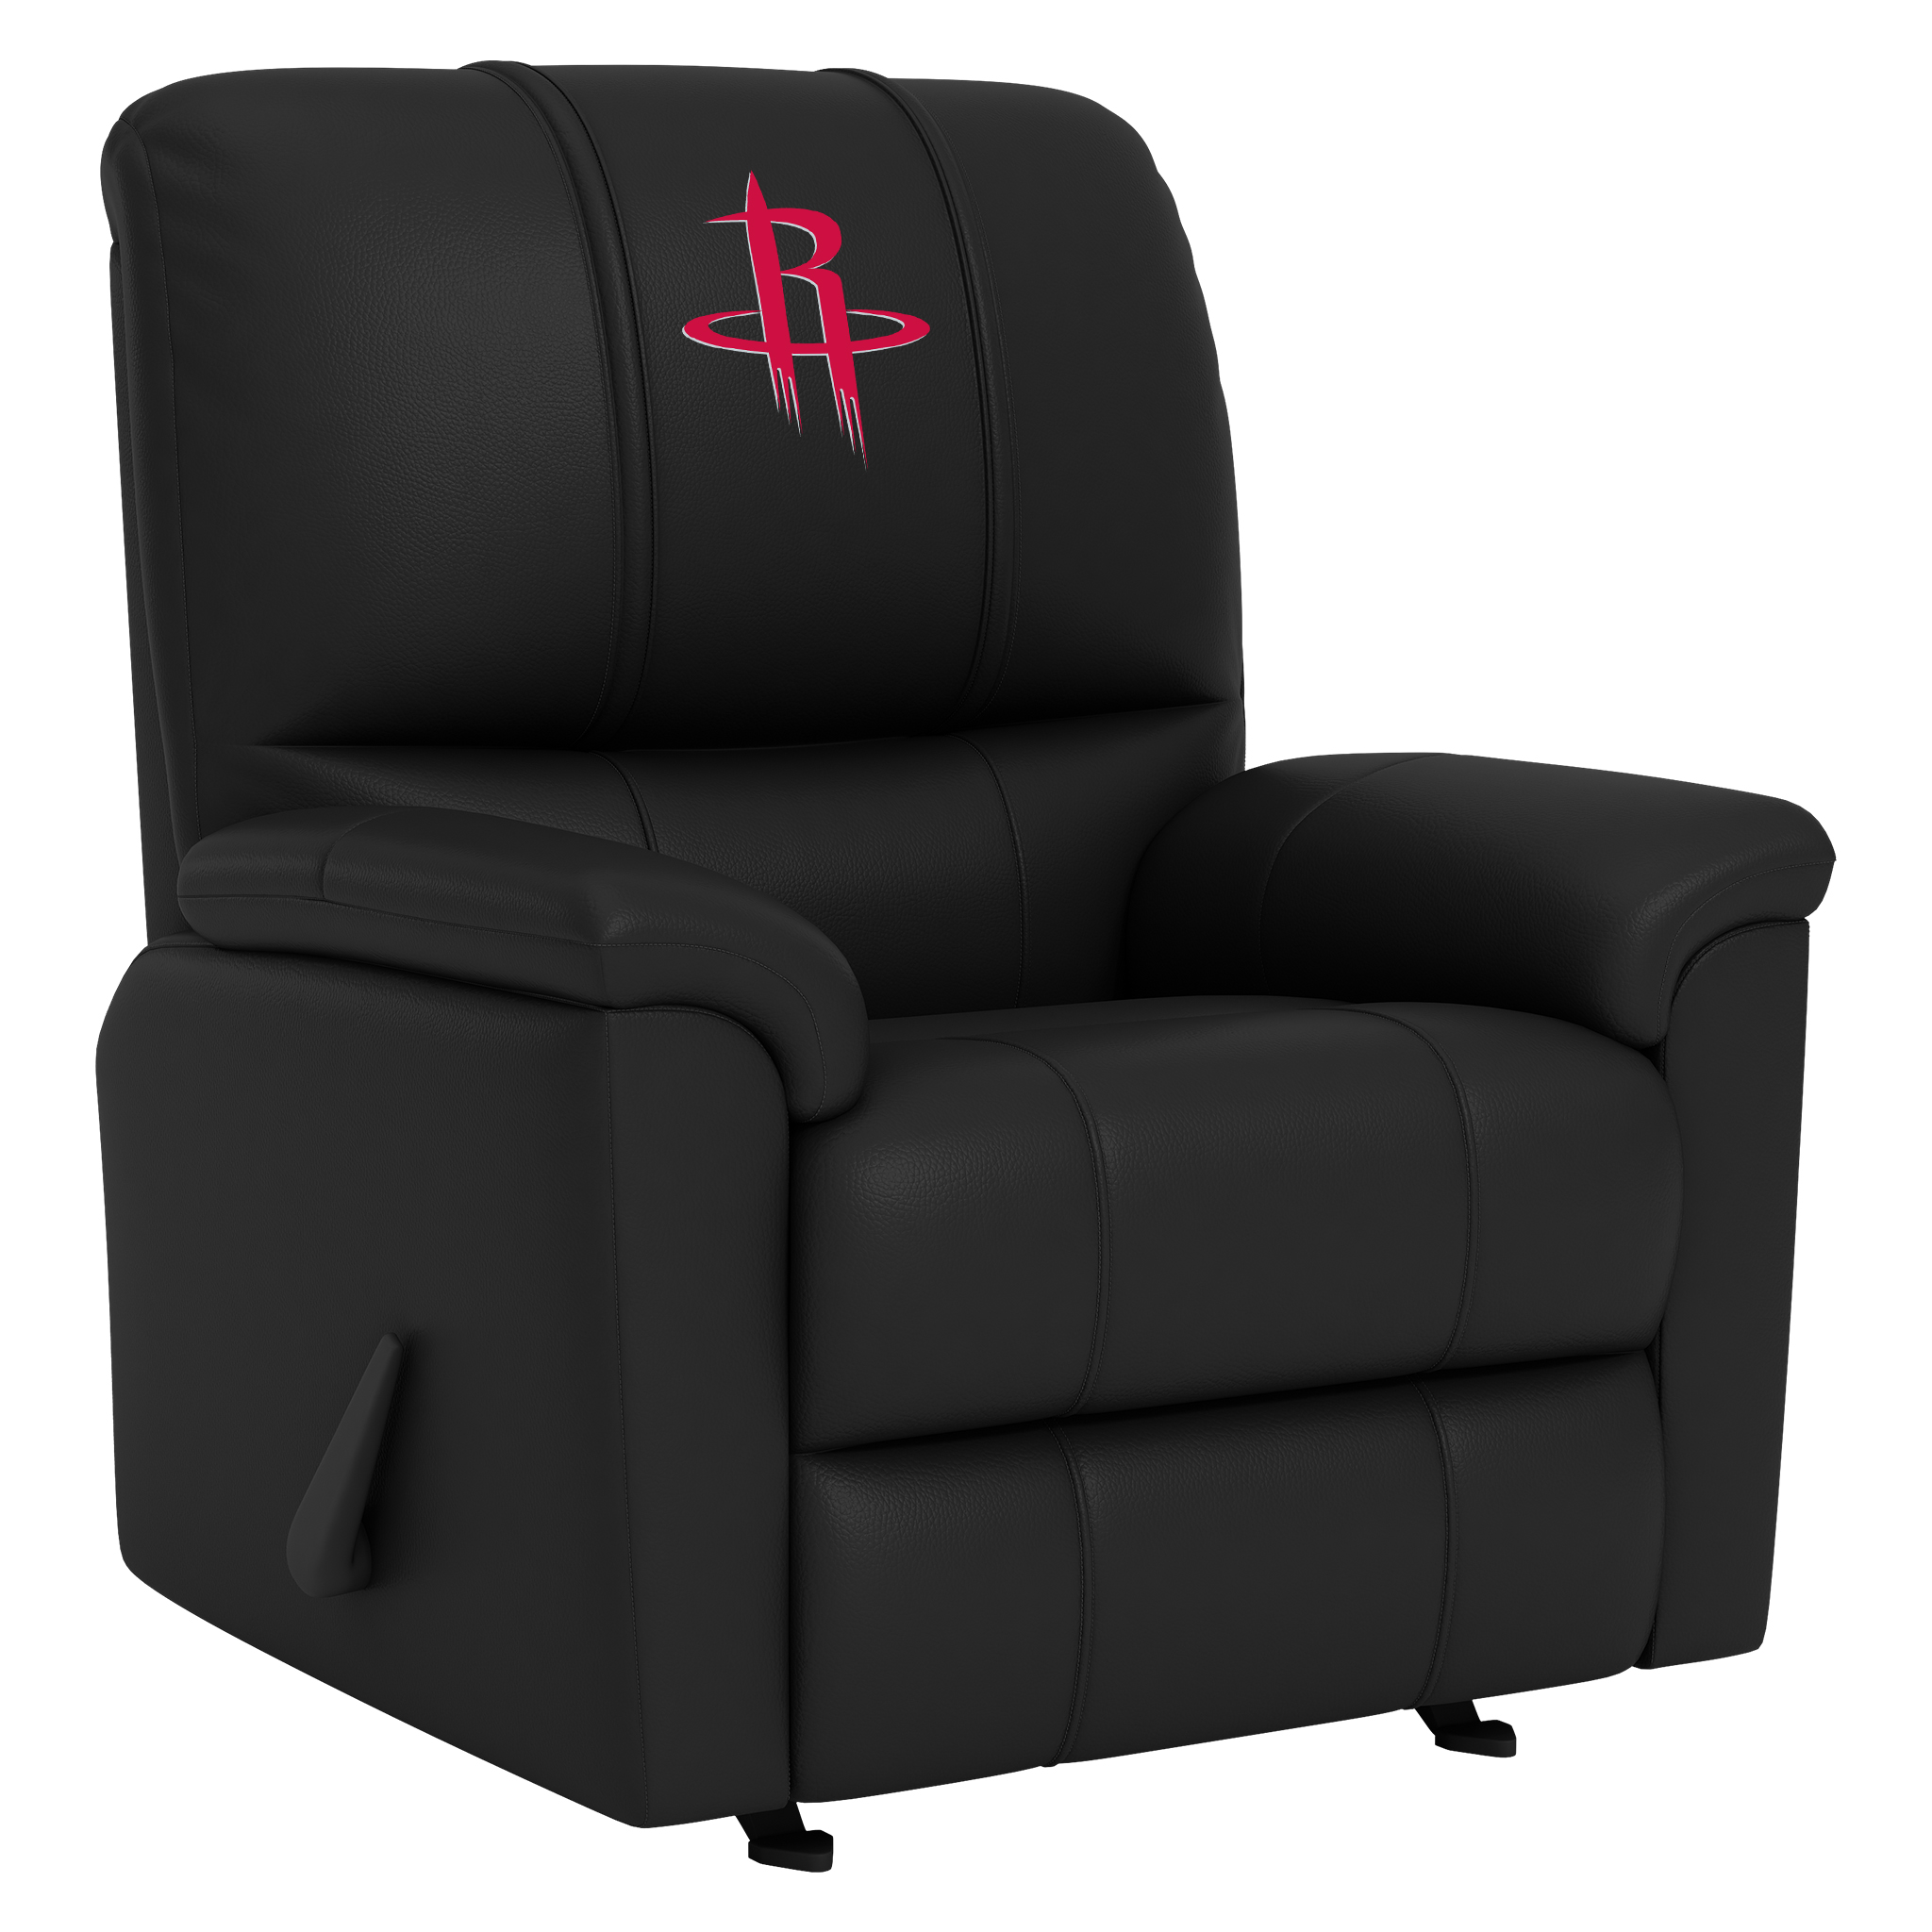 Cleveland Cavaliers Silver Club Chair with Cleveland Cavaliers C